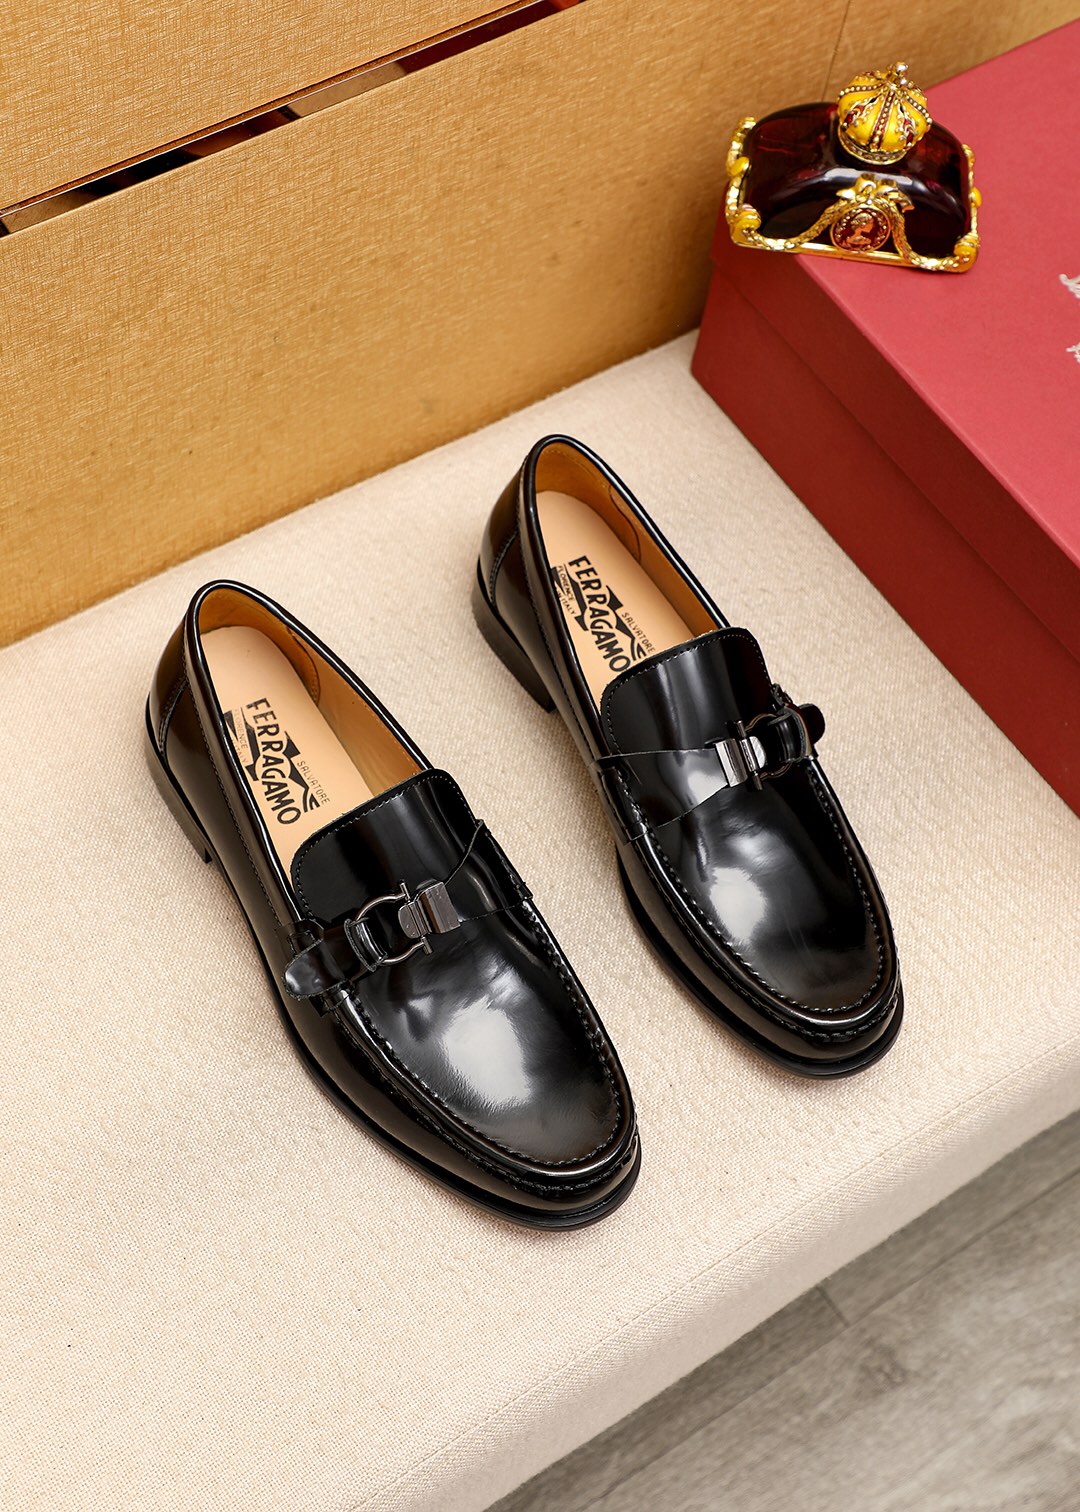 Product: Ferragamoo "Ferragamo" casual leather shoes in regular sizes 38-44 (customized at